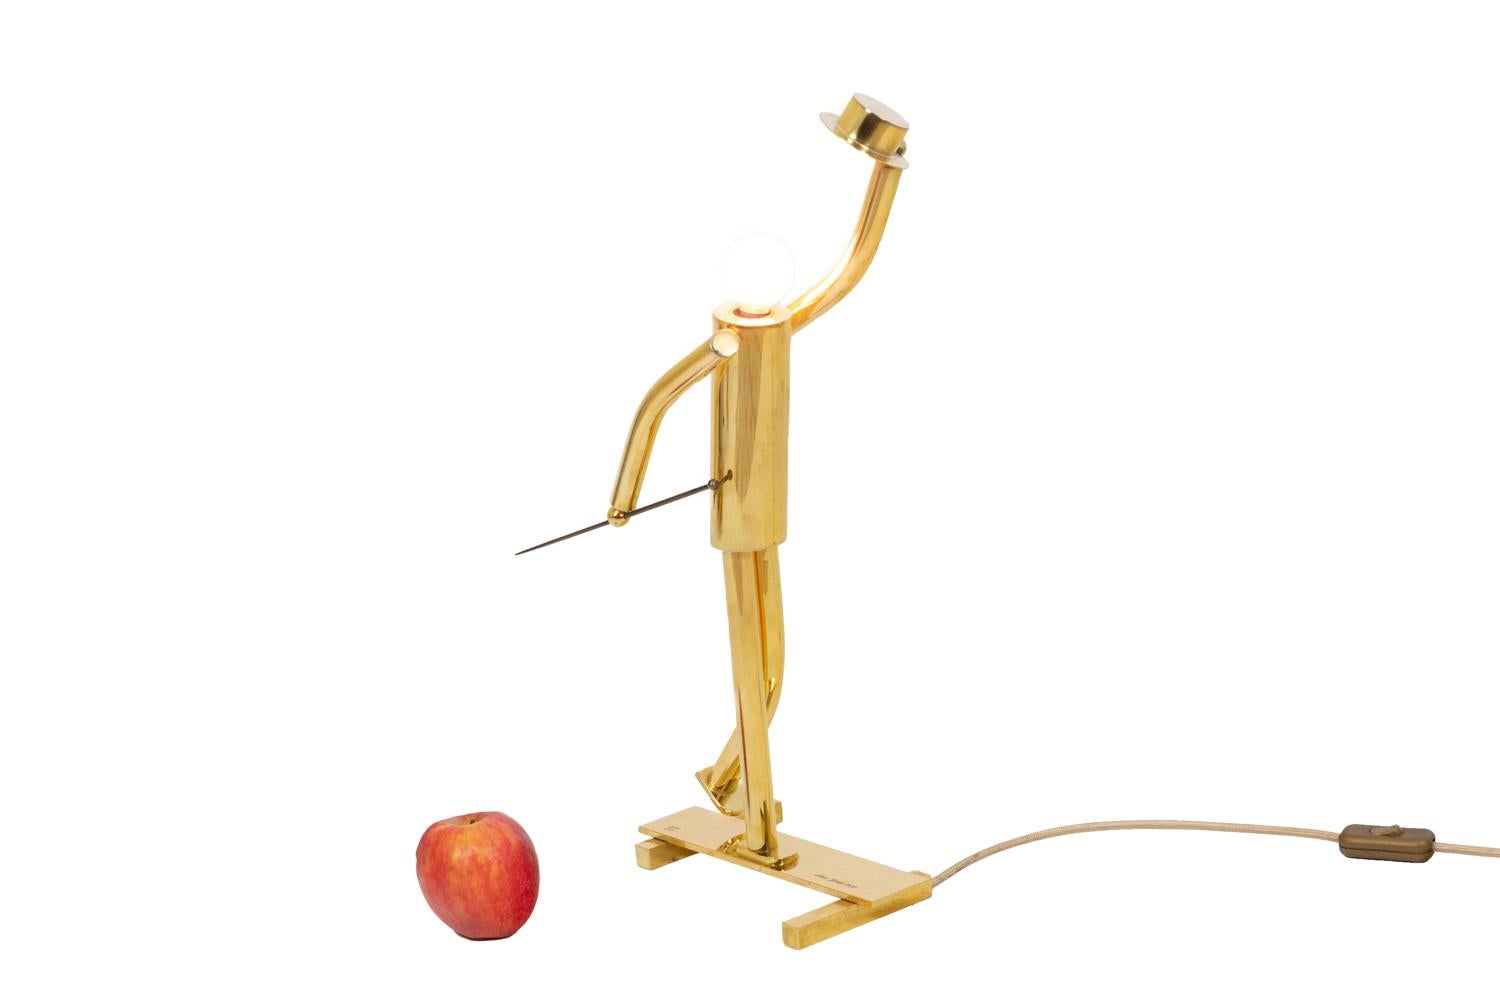 Lamp in gilt bronze representing a music hall dancer with tap shoes holding a hat and a cane in his hand. The bulb takes the place of the character’s head.

Engraved “New York 1930” on the base and stamped.

American work realized in the 1930’s.